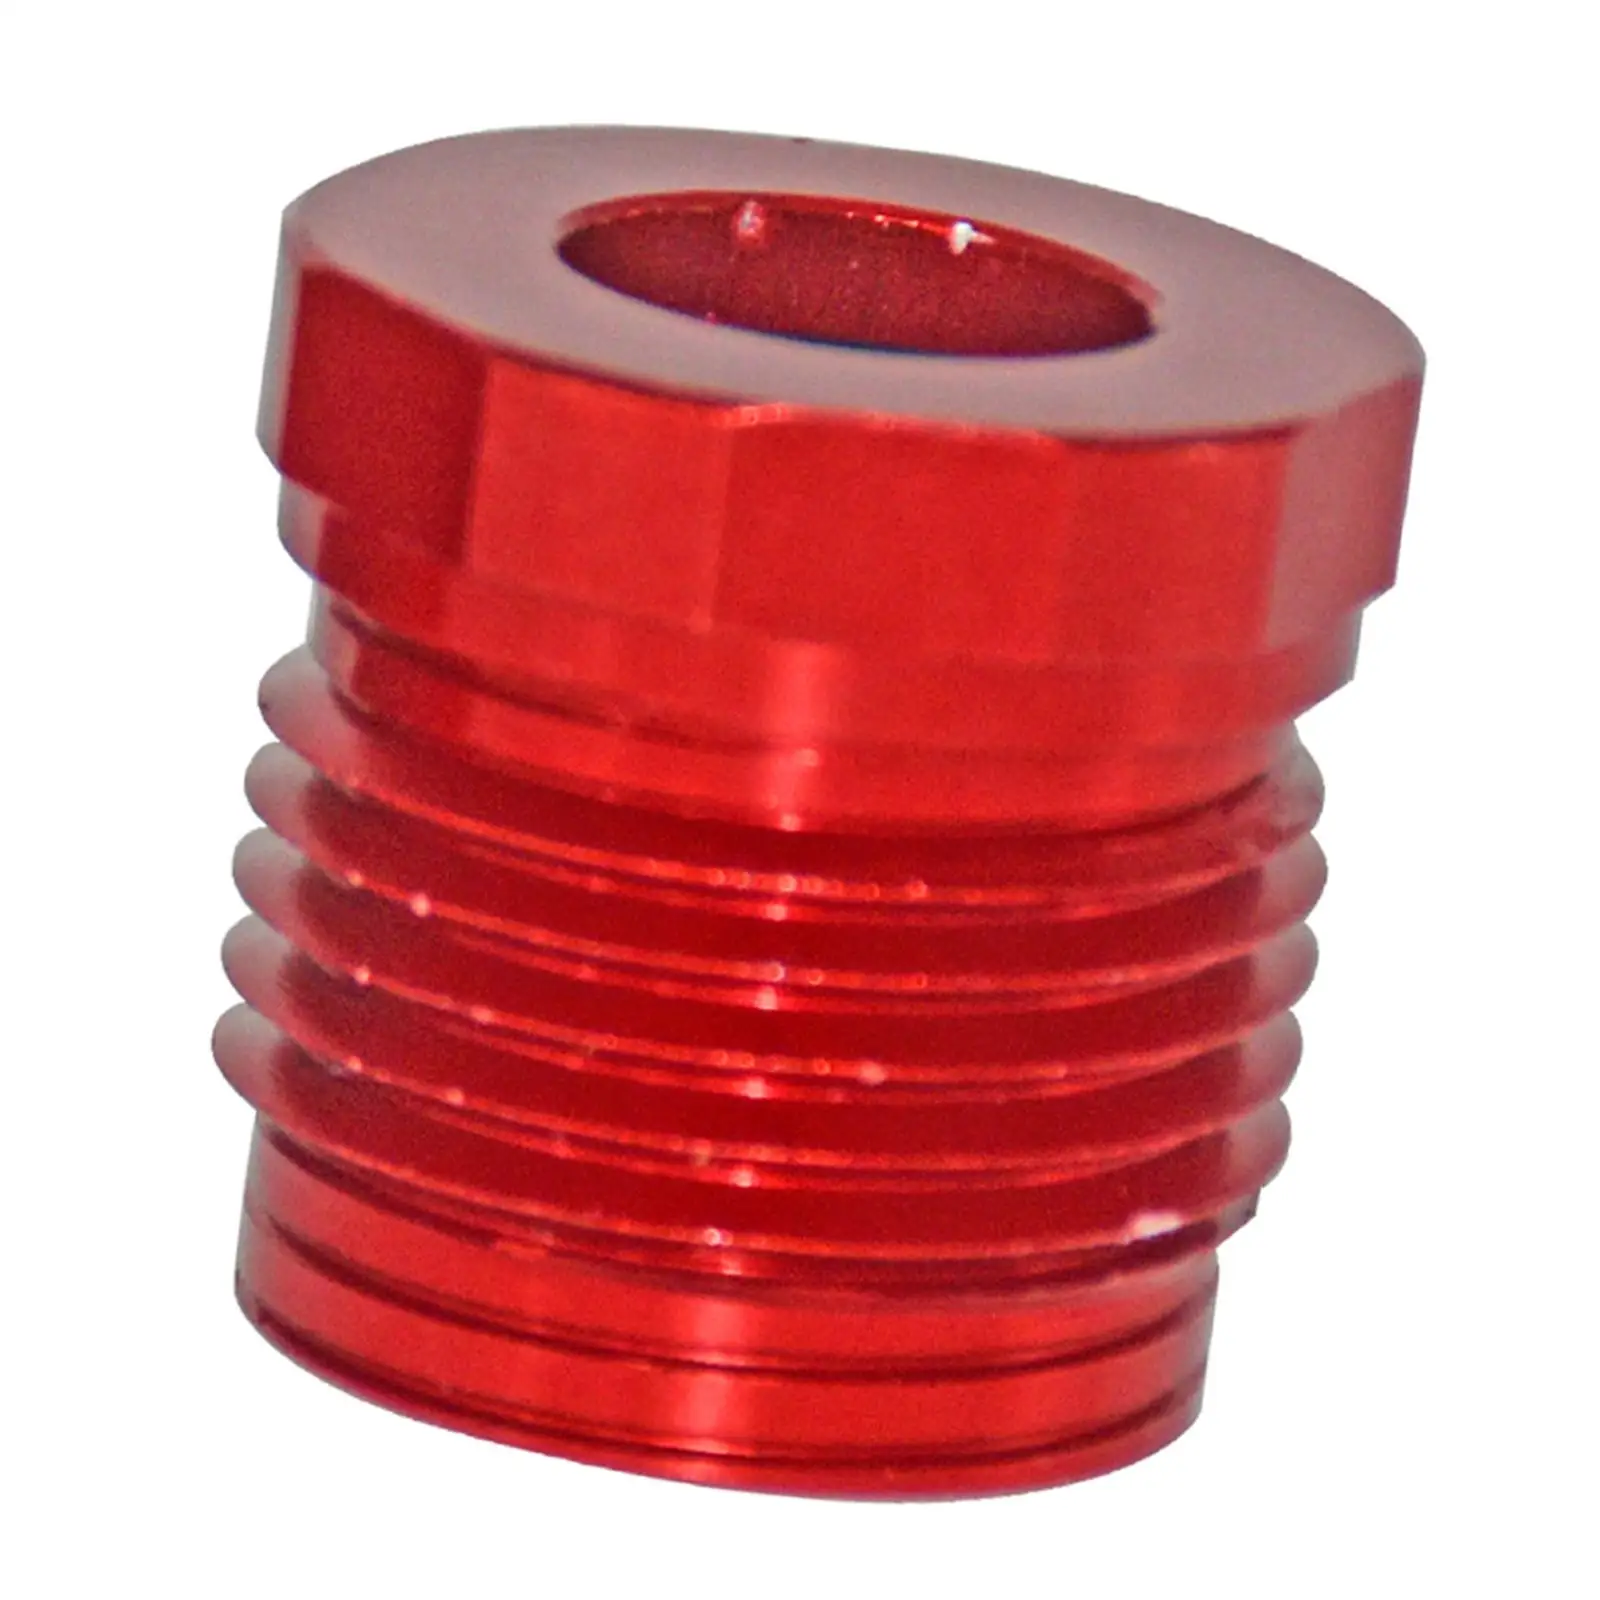 Steering and Reverse Cable Lock Nut Durable Replacement Professional Red Cable